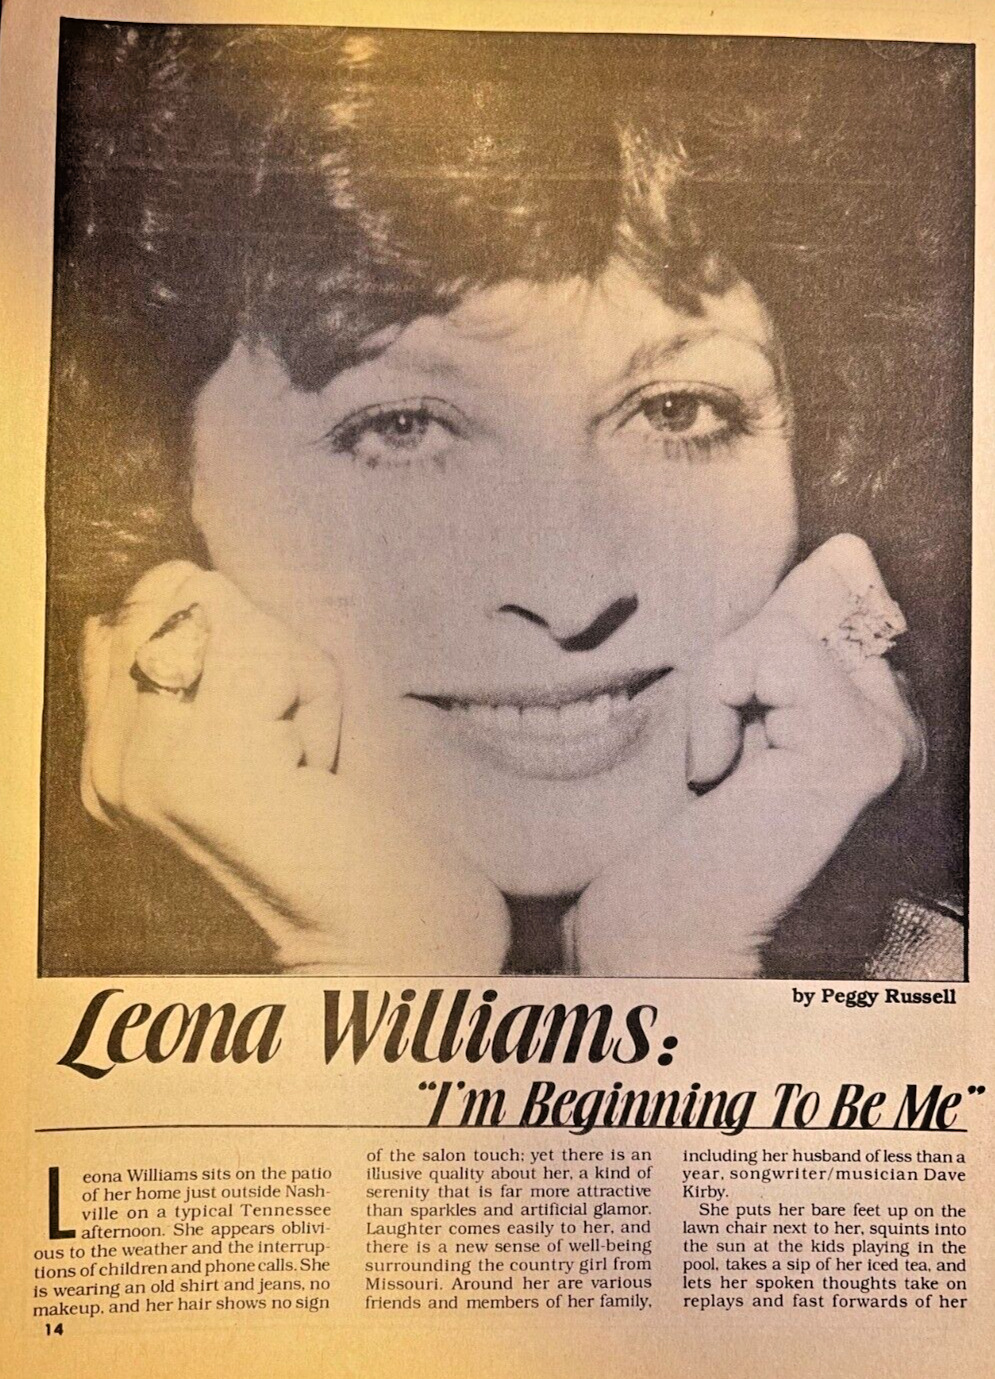 1986 Country Western Performer Leona Williams